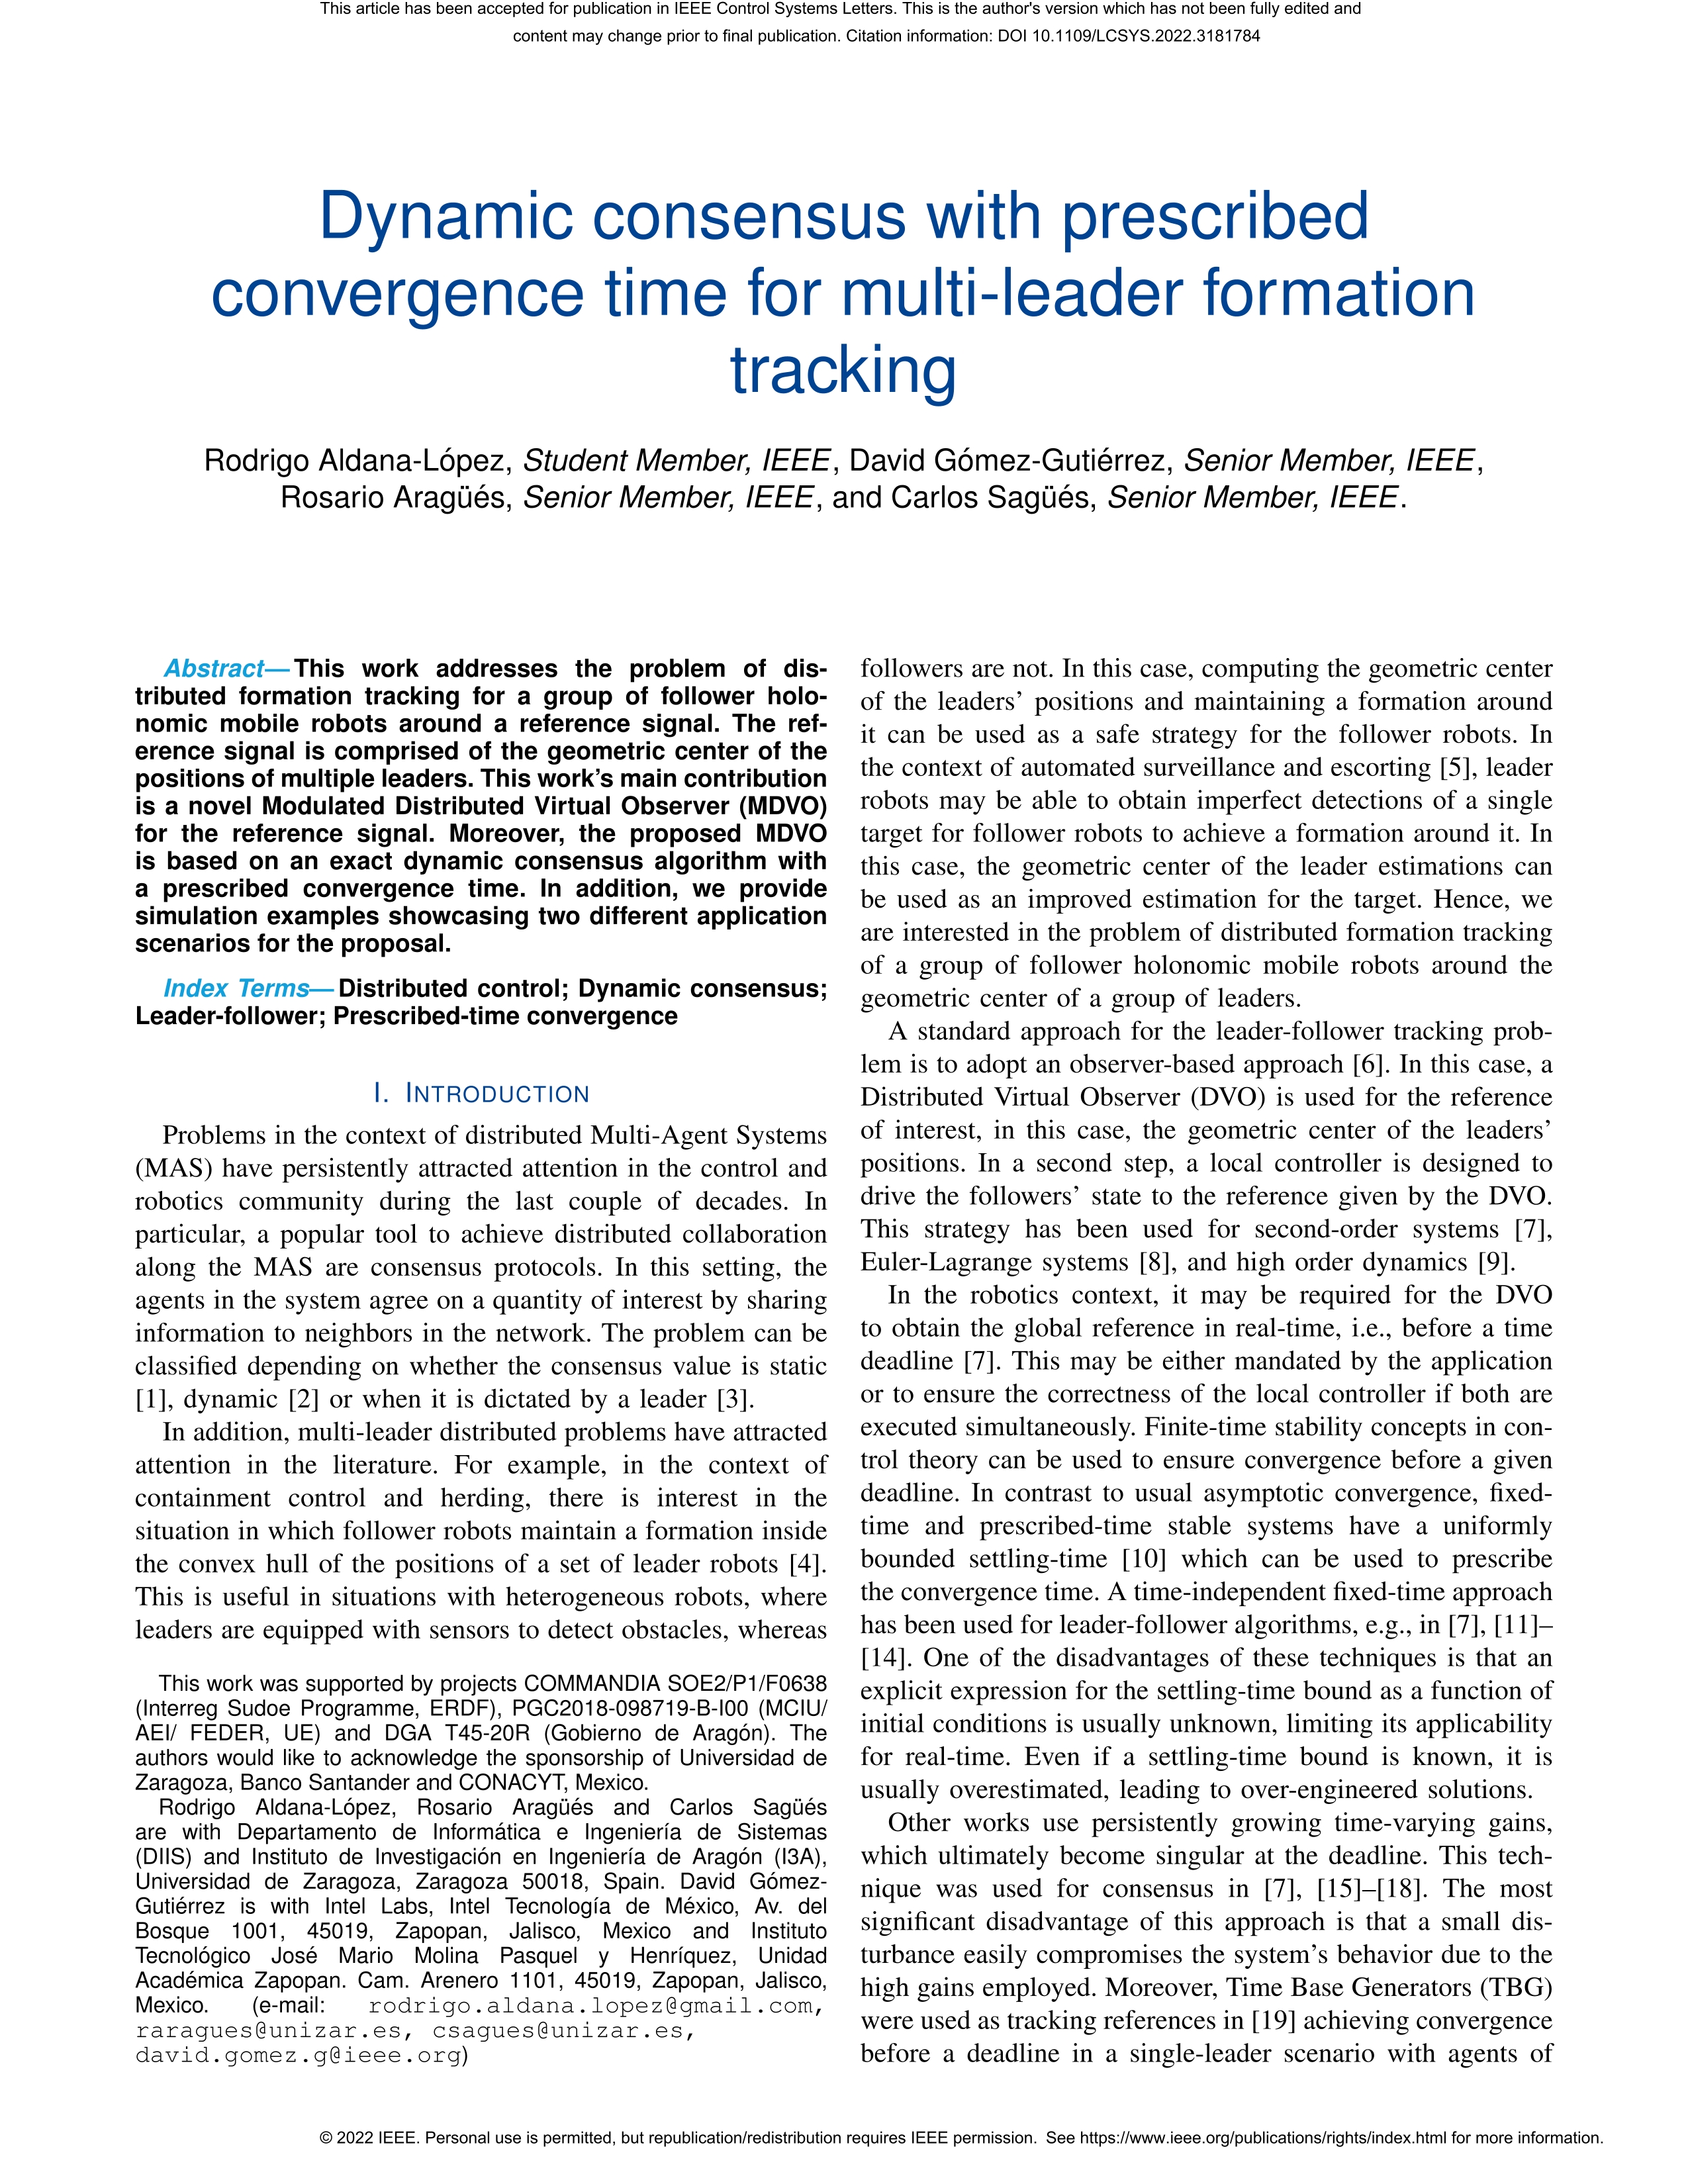 Dynamic consensus with prescribed convergence time for multi-leader formation tracking